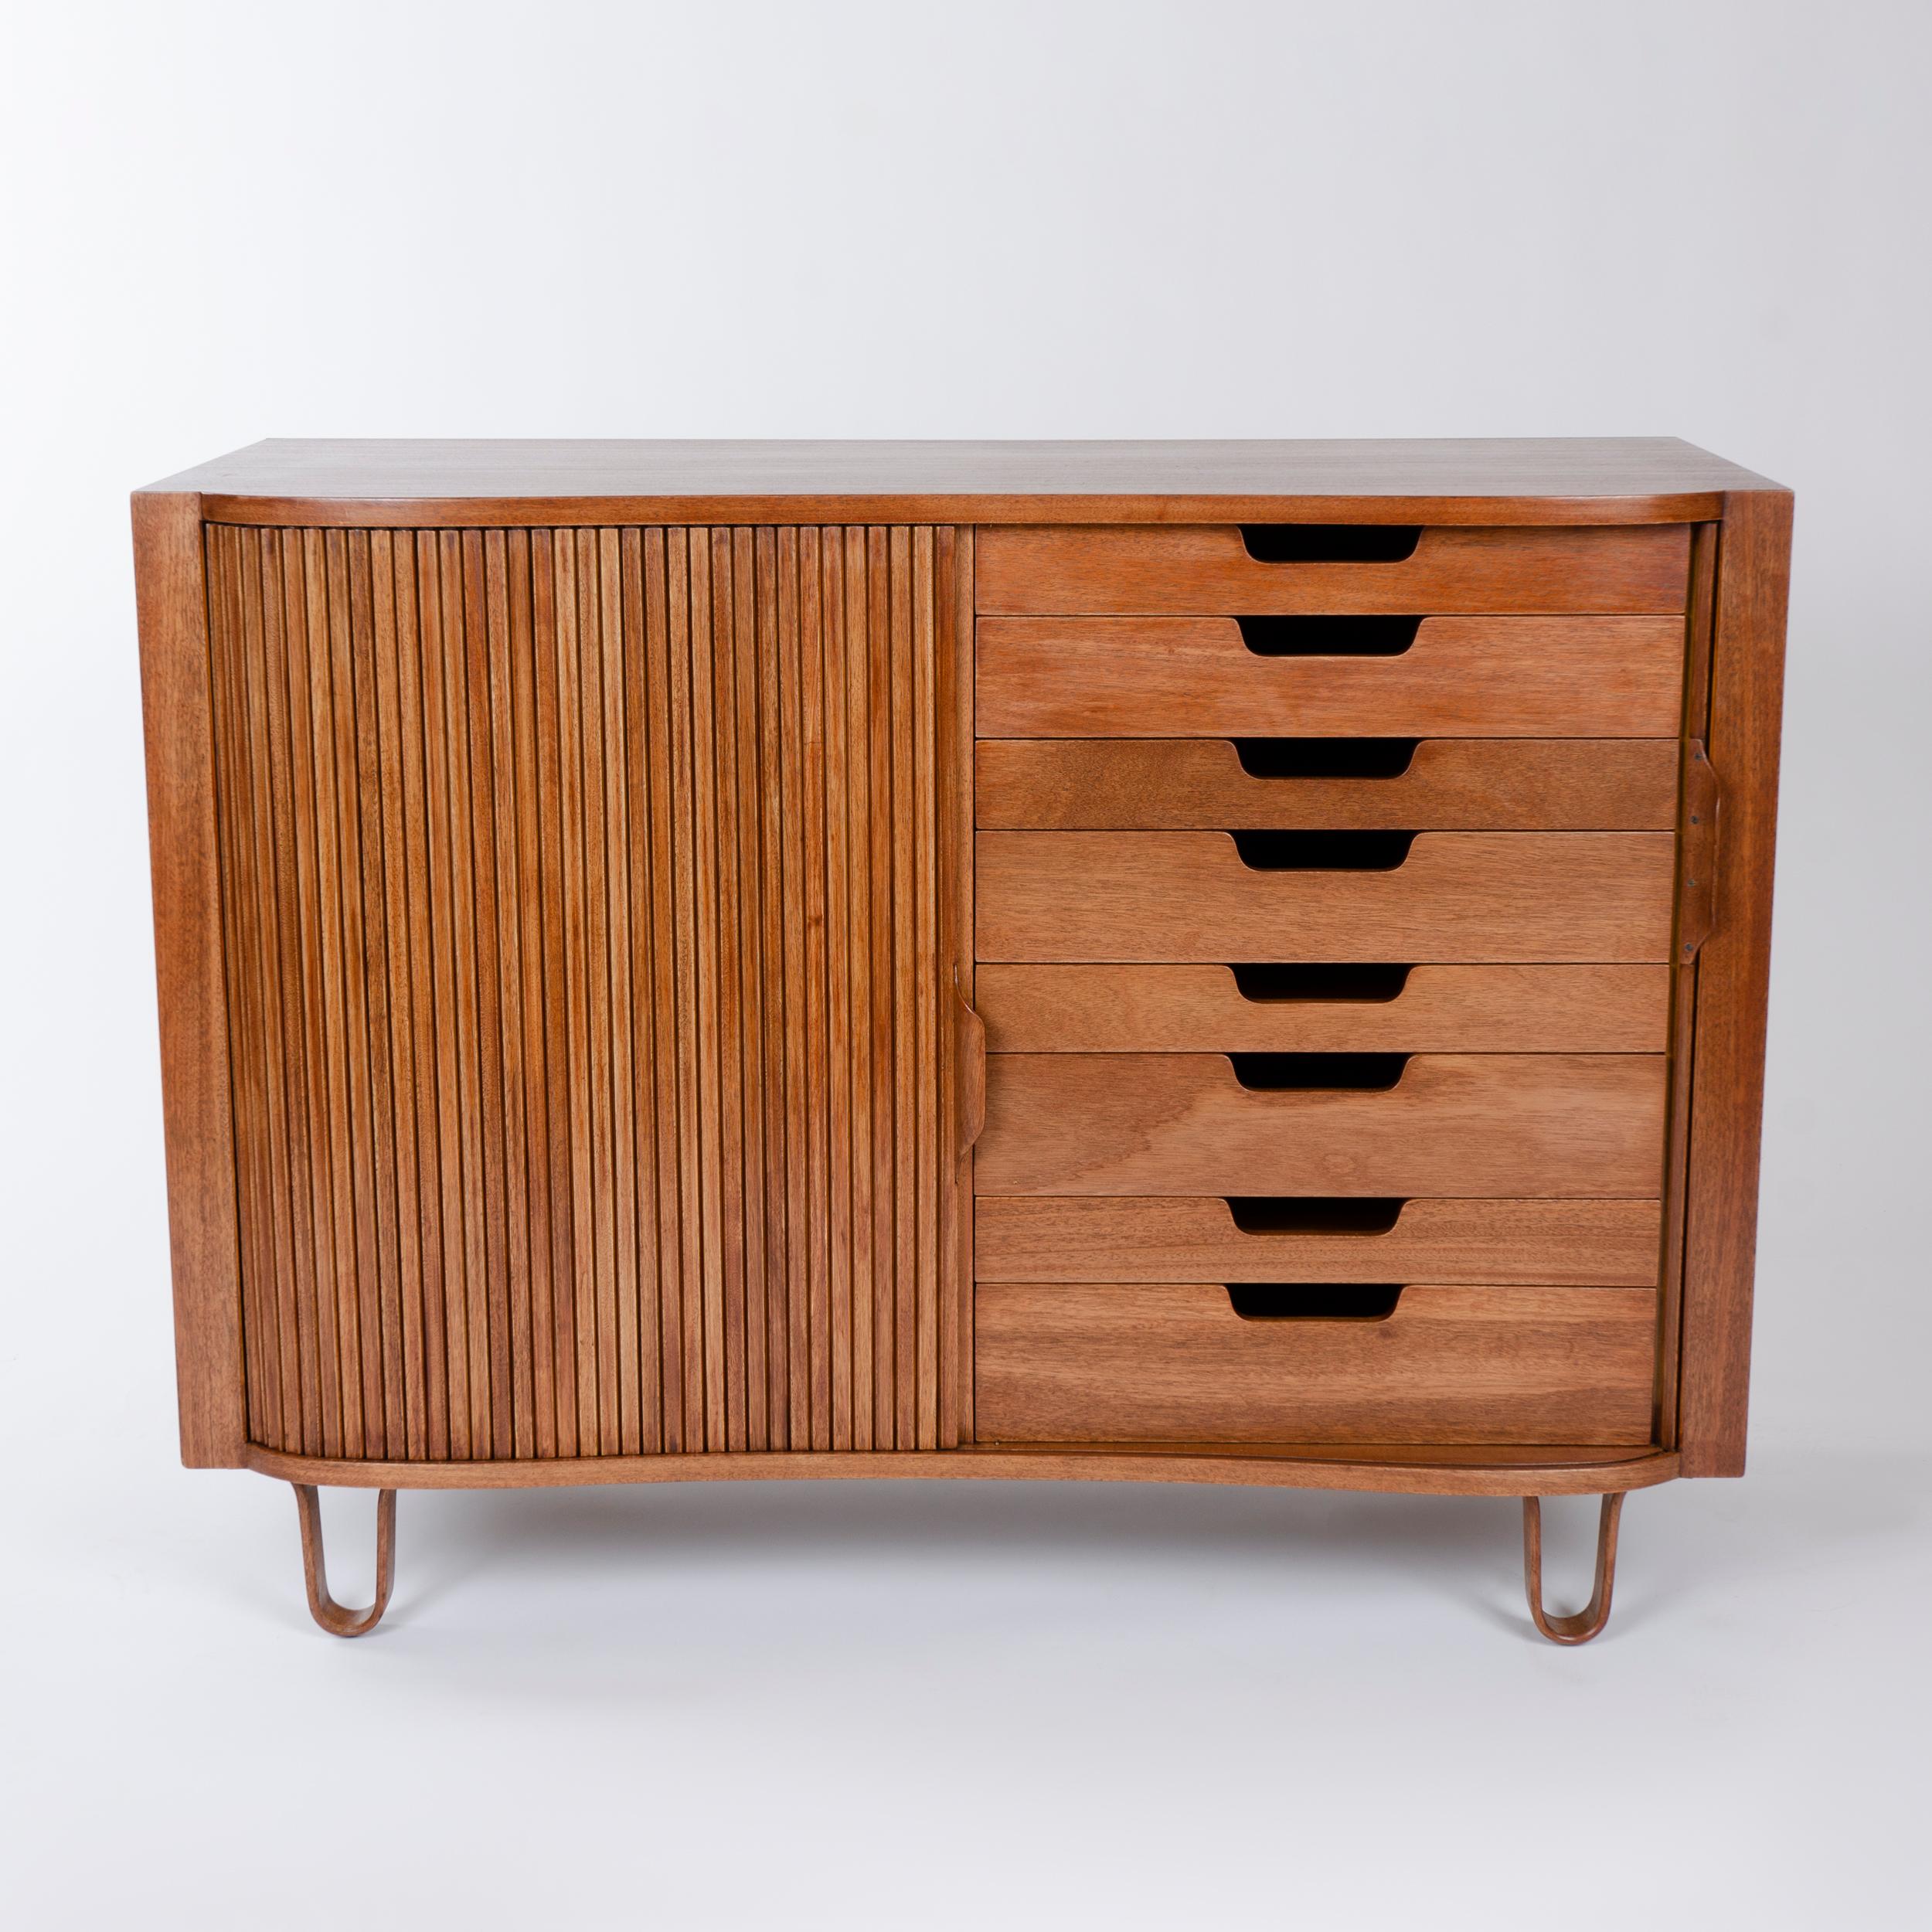 American 1950s Mister Cabinet in Mahogany by Edward Wormley for Dunbar